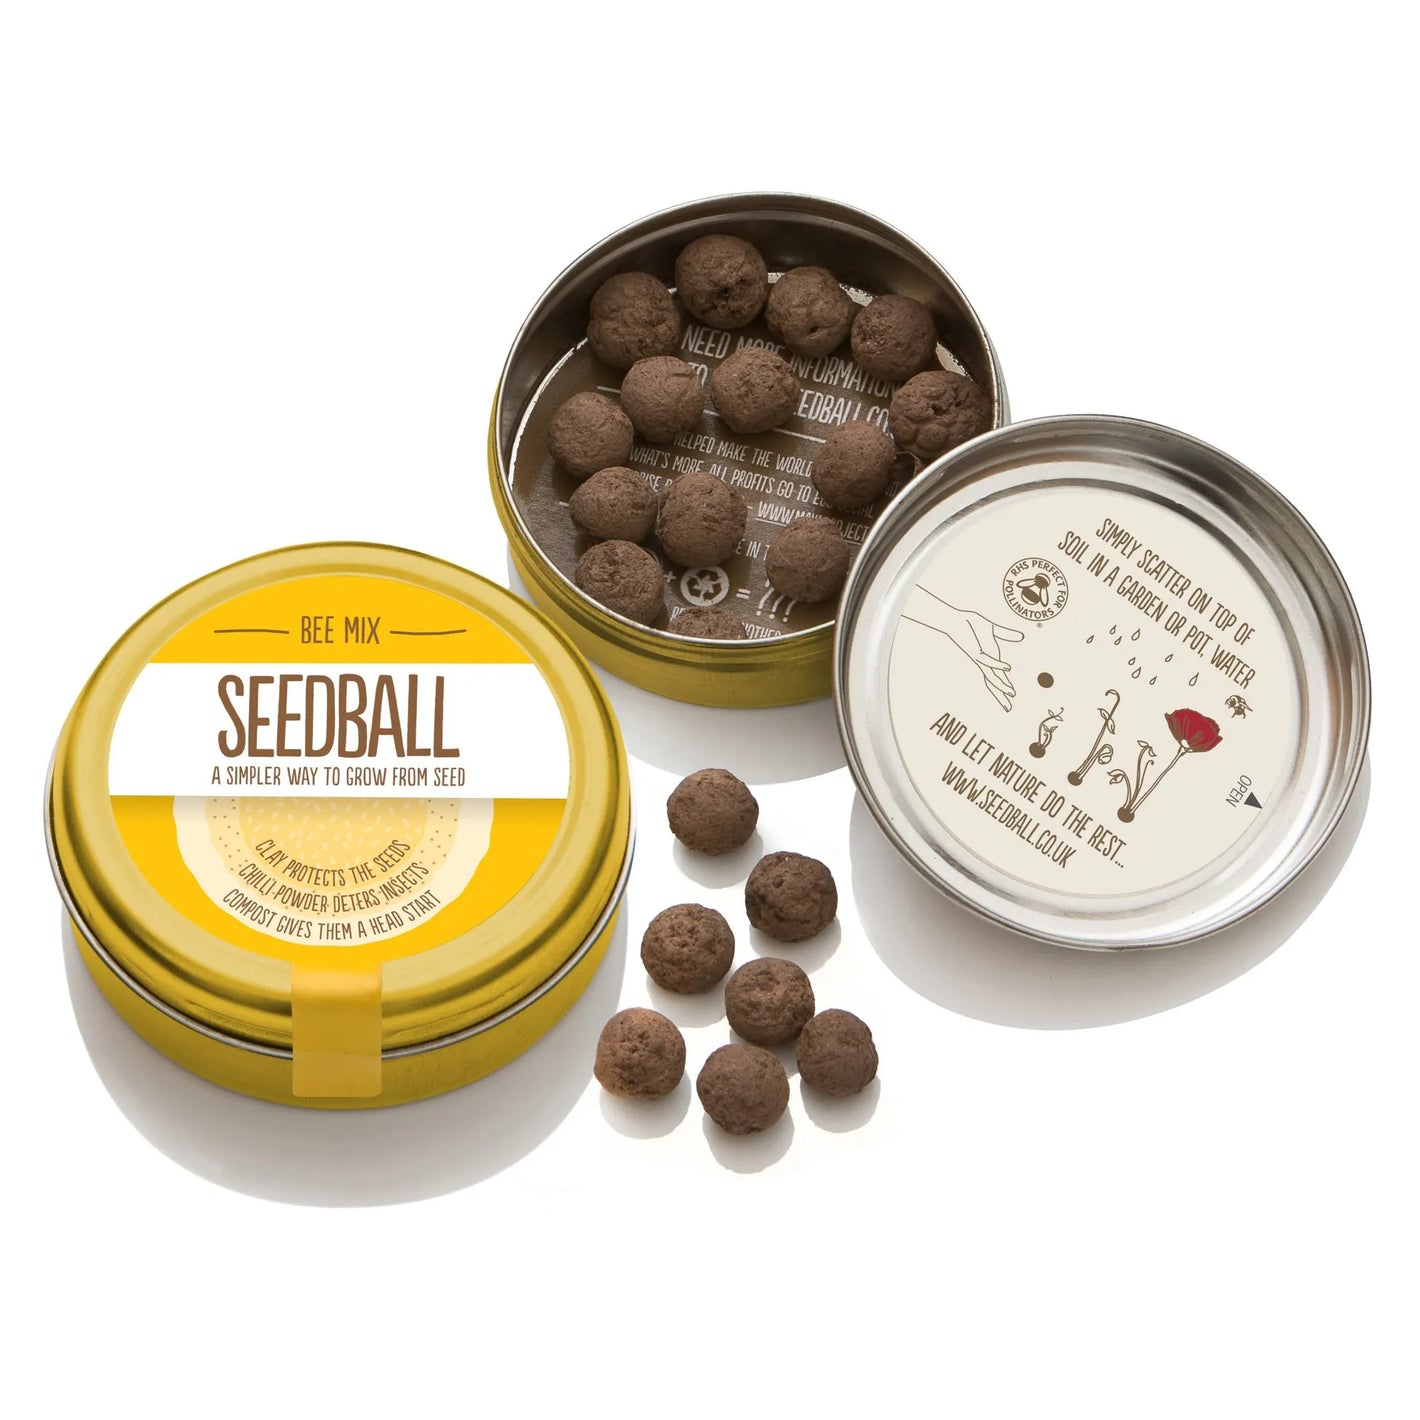 limited edition gold seedball bee mix